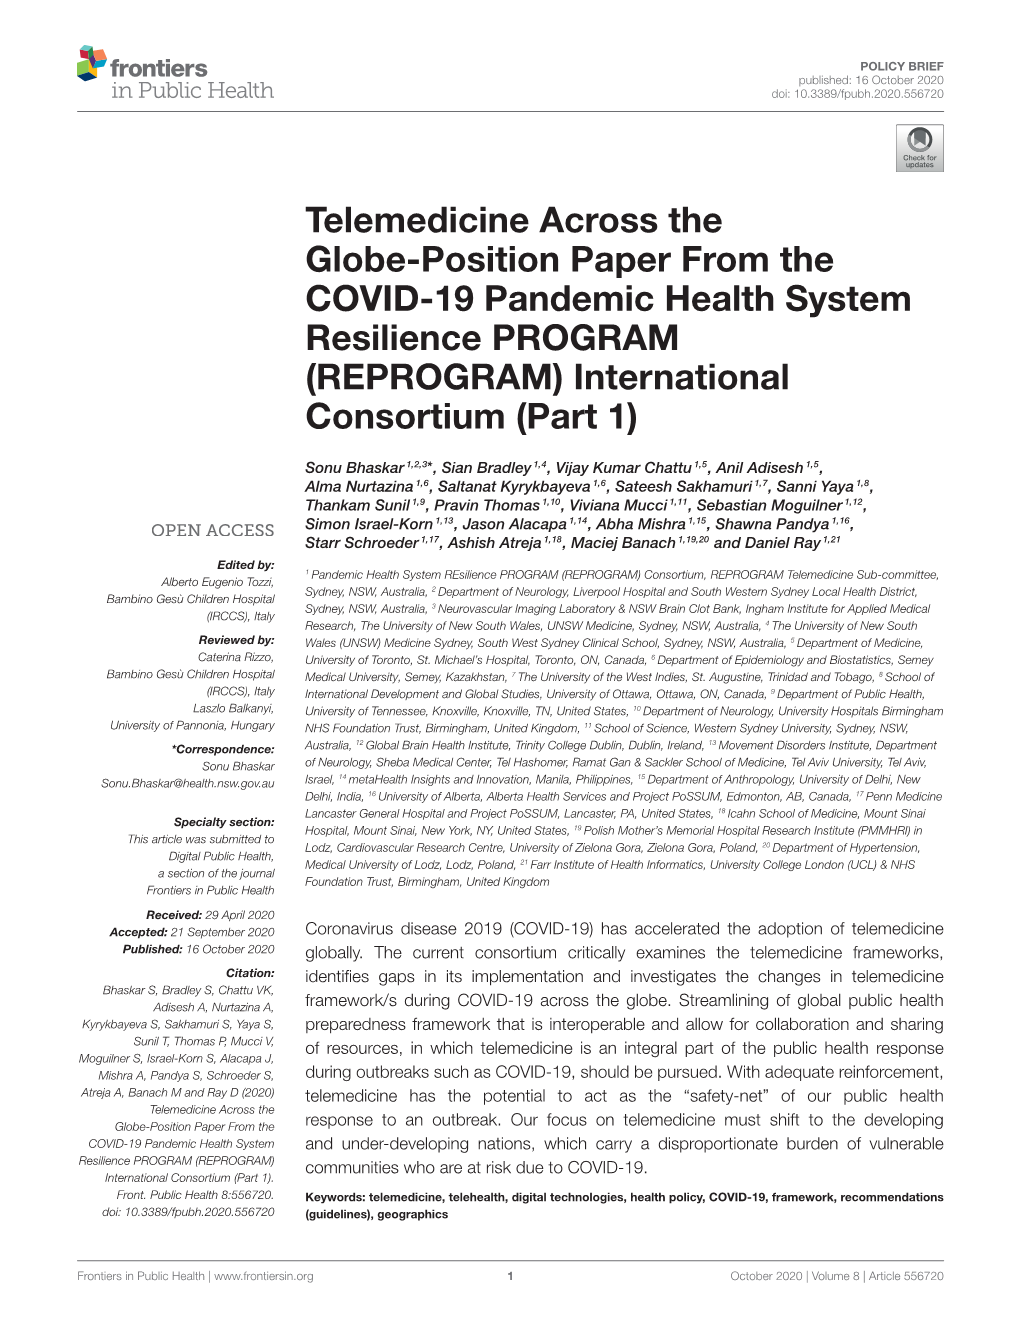 Telemedicine Across the Globe-Position Paper from the COVID-19 Pandemic Health System Resilience PROGRAM (REPROGRAM) International Consortium (Part 1)